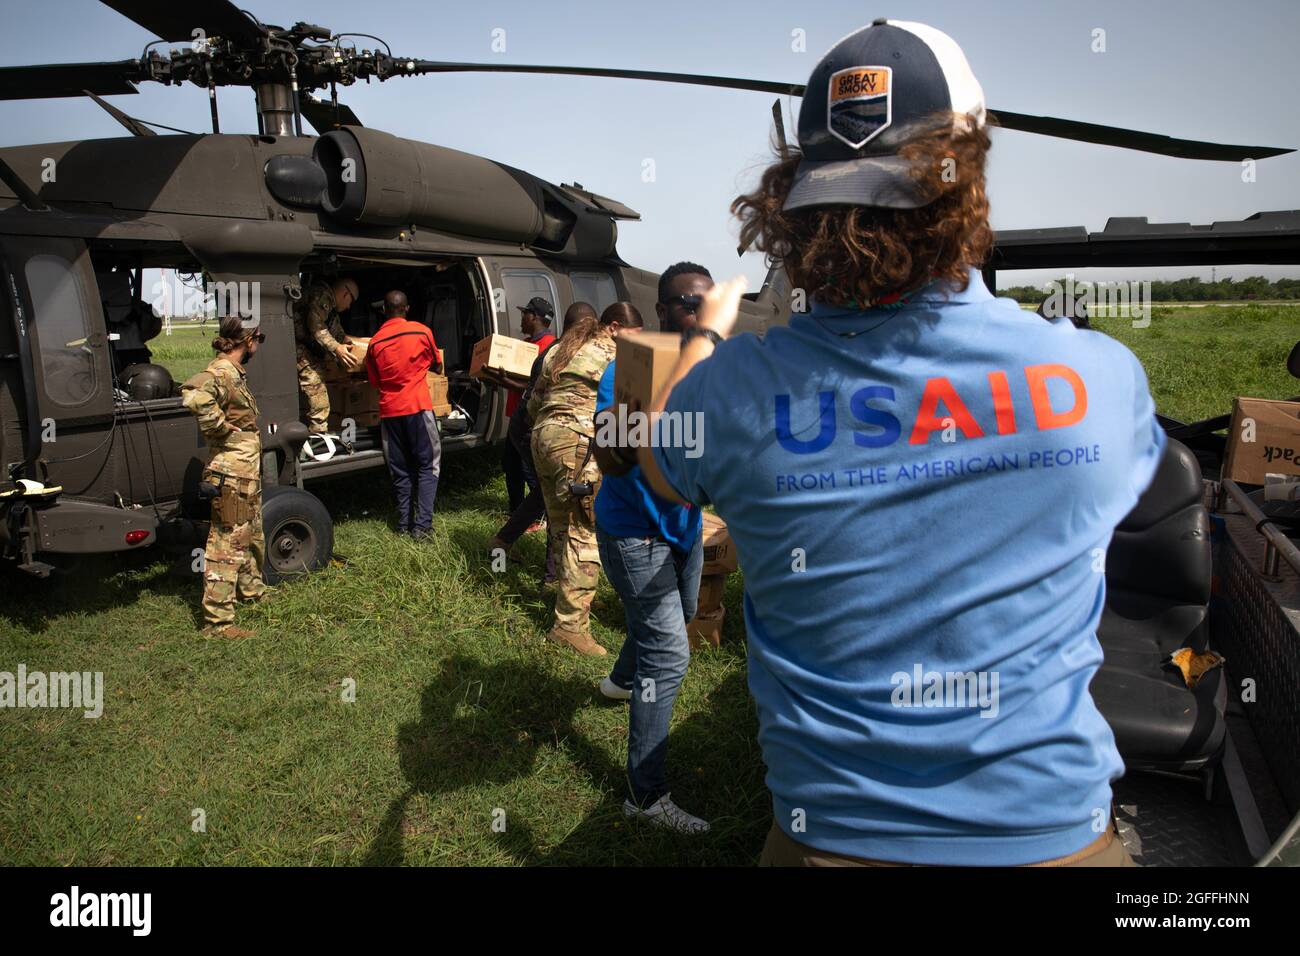 Anse Au Veau, Haiti. 24th Aug, 2021. U.S. Army soldiers and USAID staff load food supplies during a humanitarian mission August 24, 2021 in Port-au-Prince, Haiti. The military is assisting in the aftermath of the recent earthquake. Credit: Planetpix/Alamy Live News Stock Photo